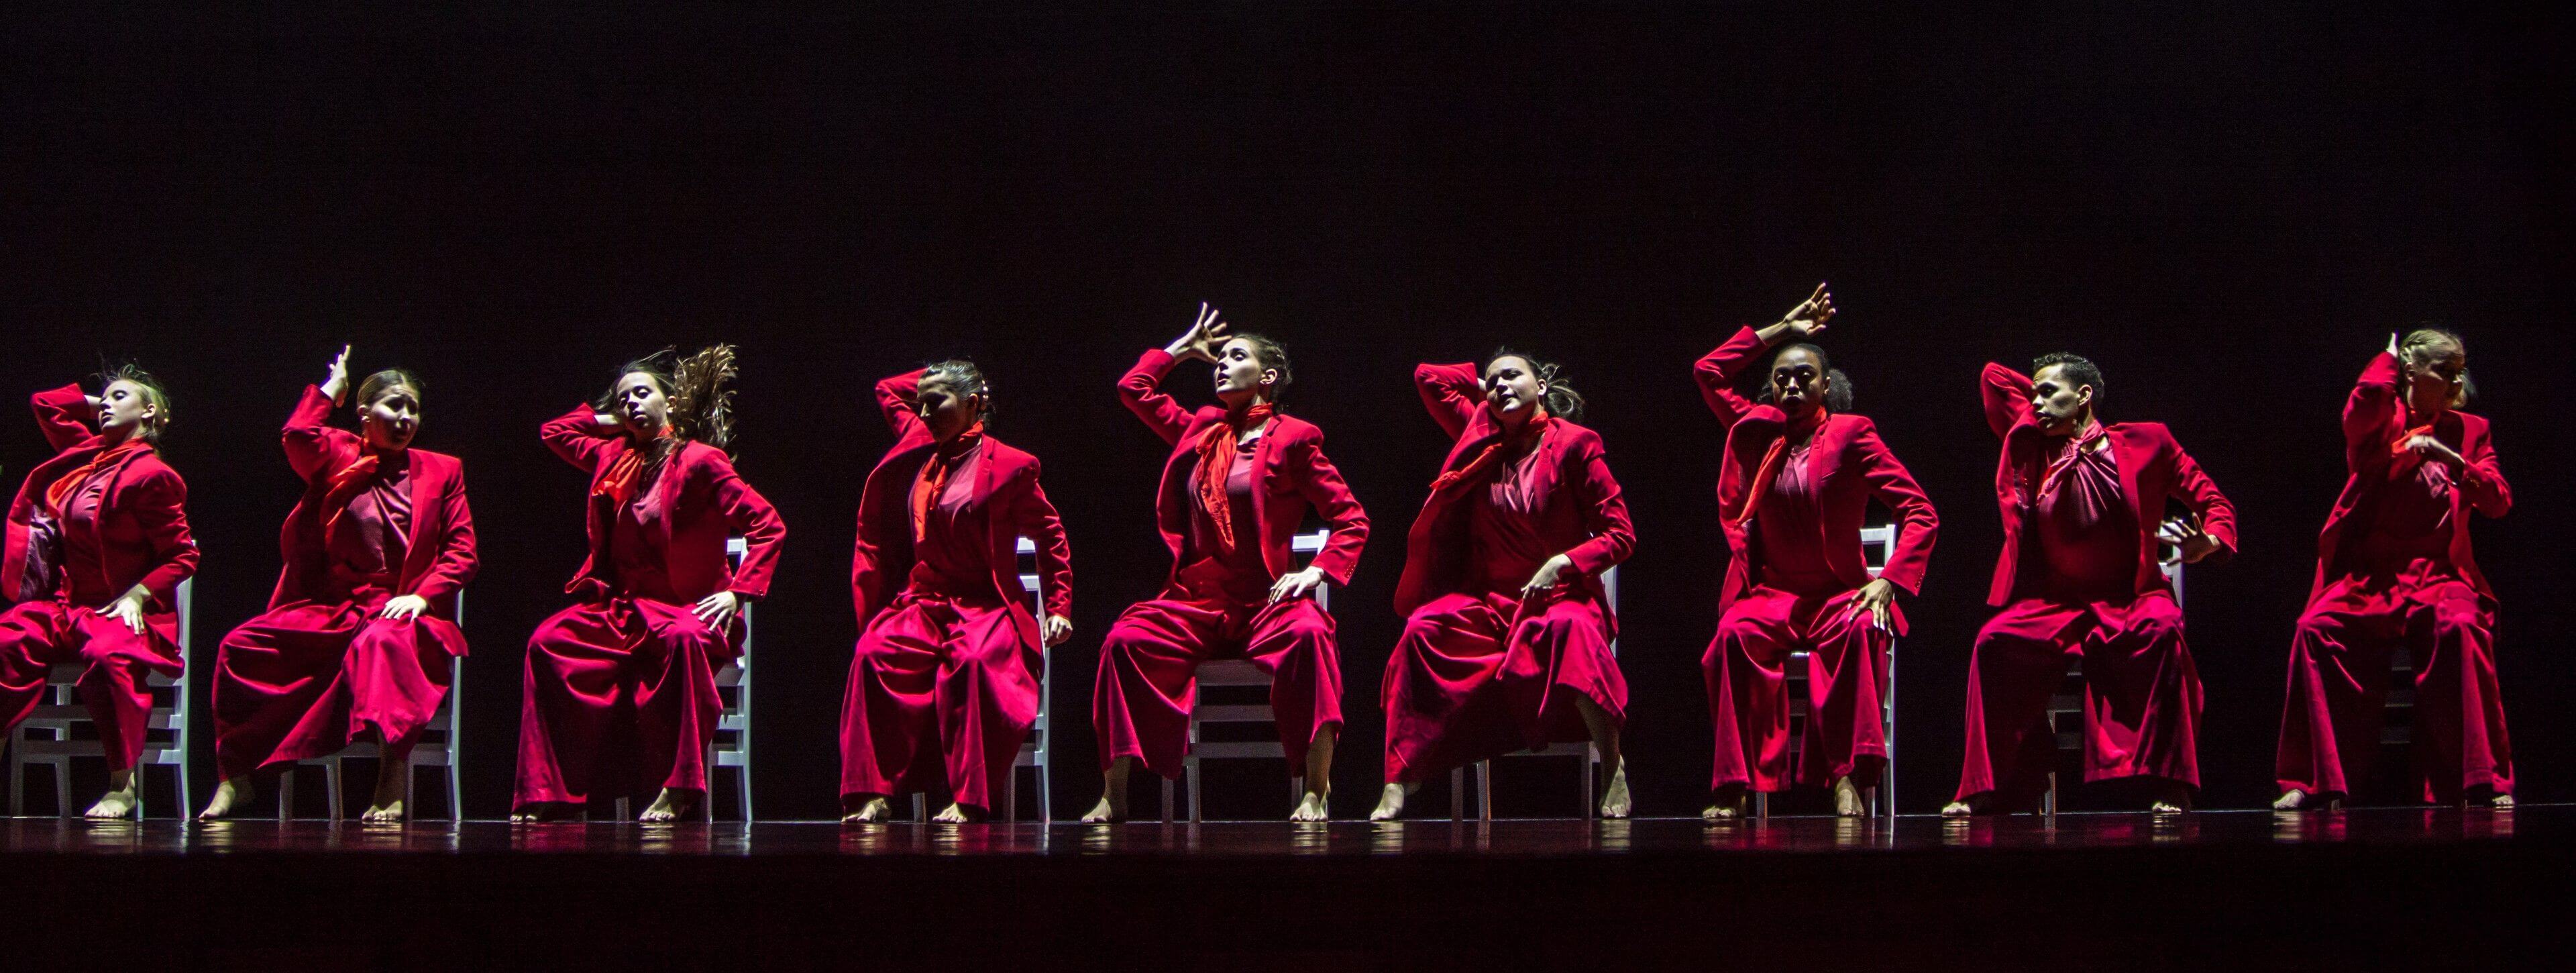 dancers in red sitting on chairs against a black background